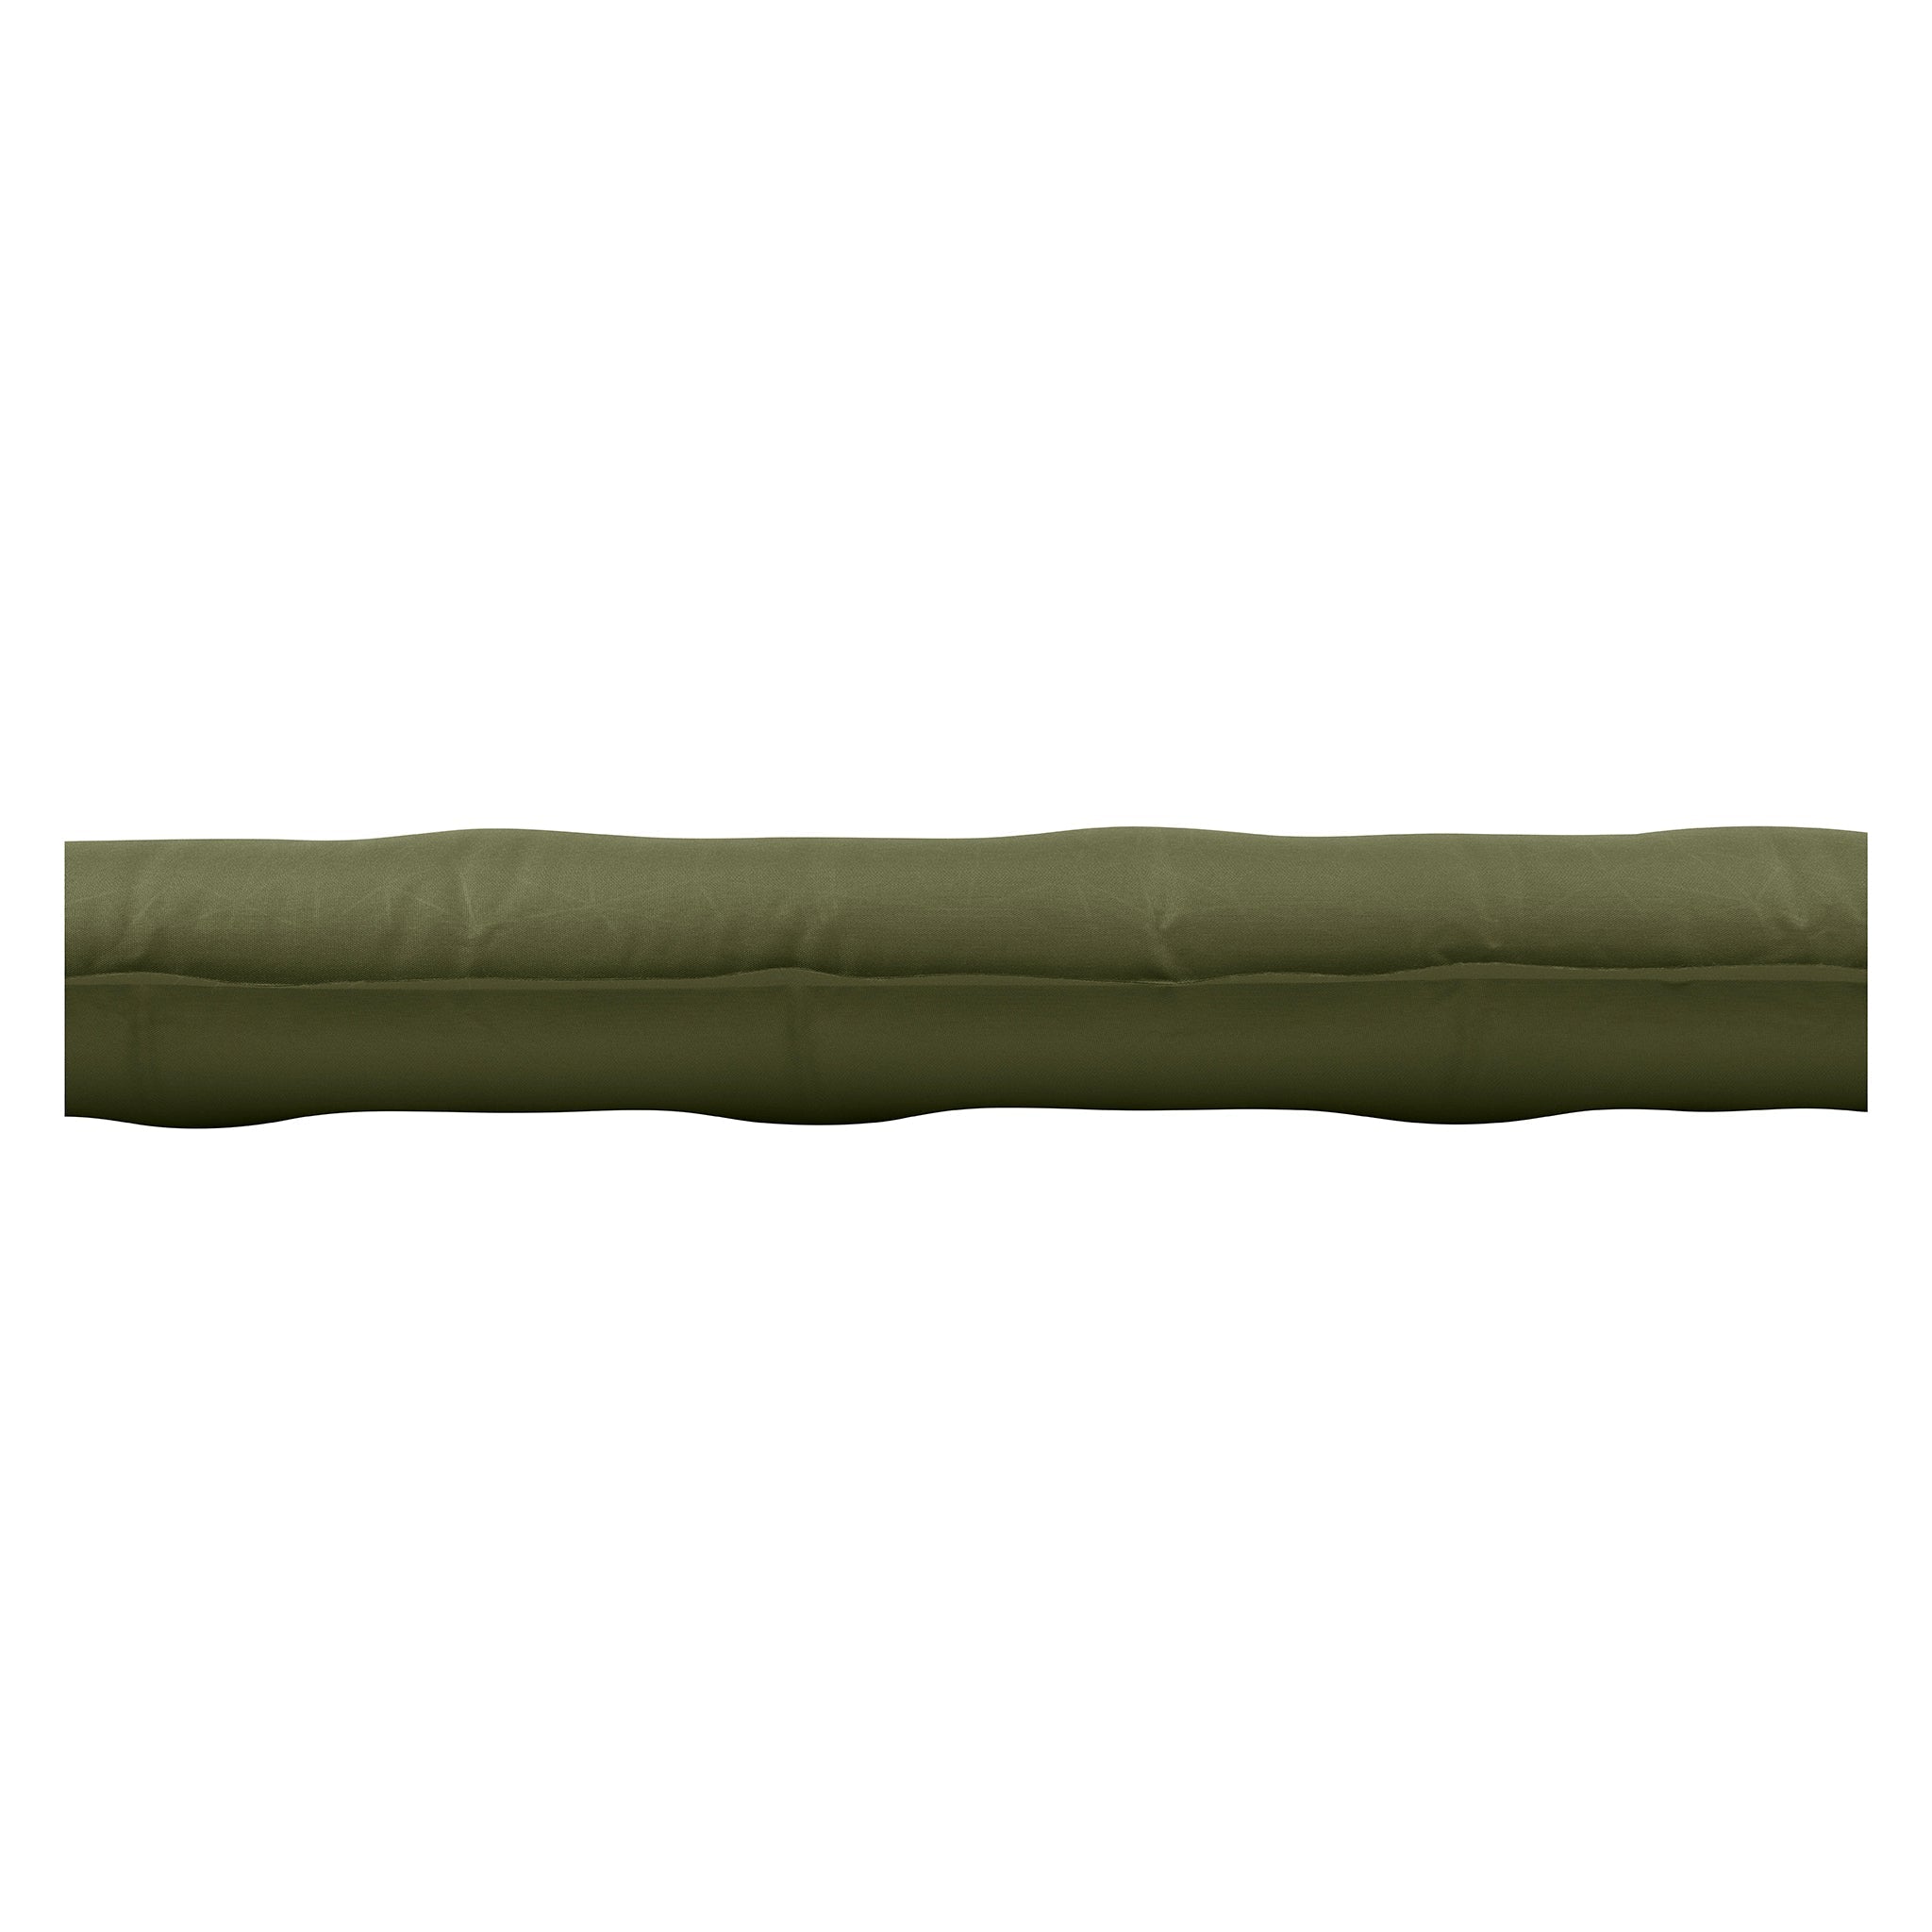 Camp Plus Self-Inflating Sleeping Pad Thickness